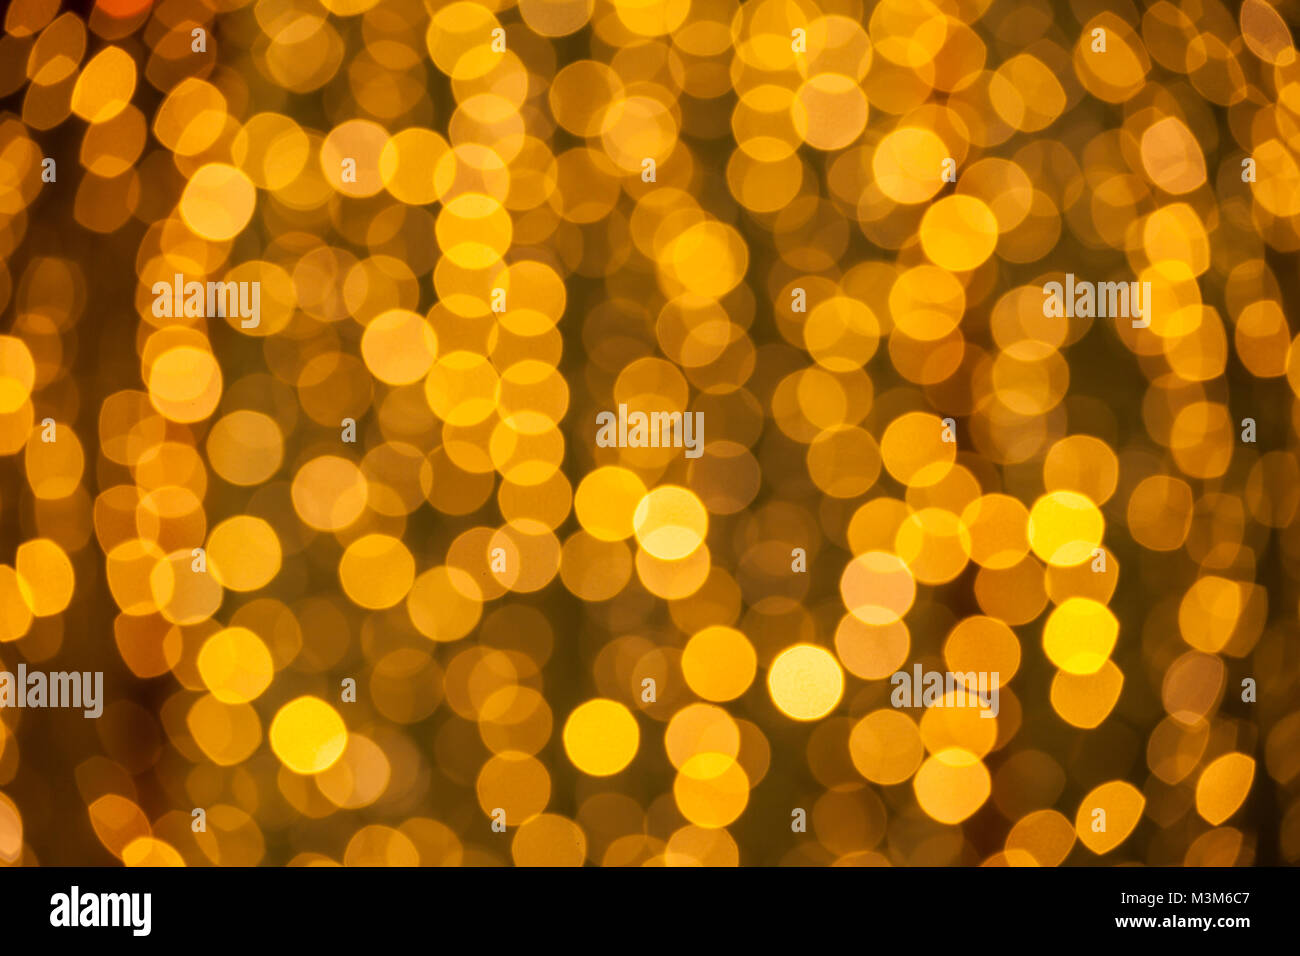 Christmas background in gold Stock Photo